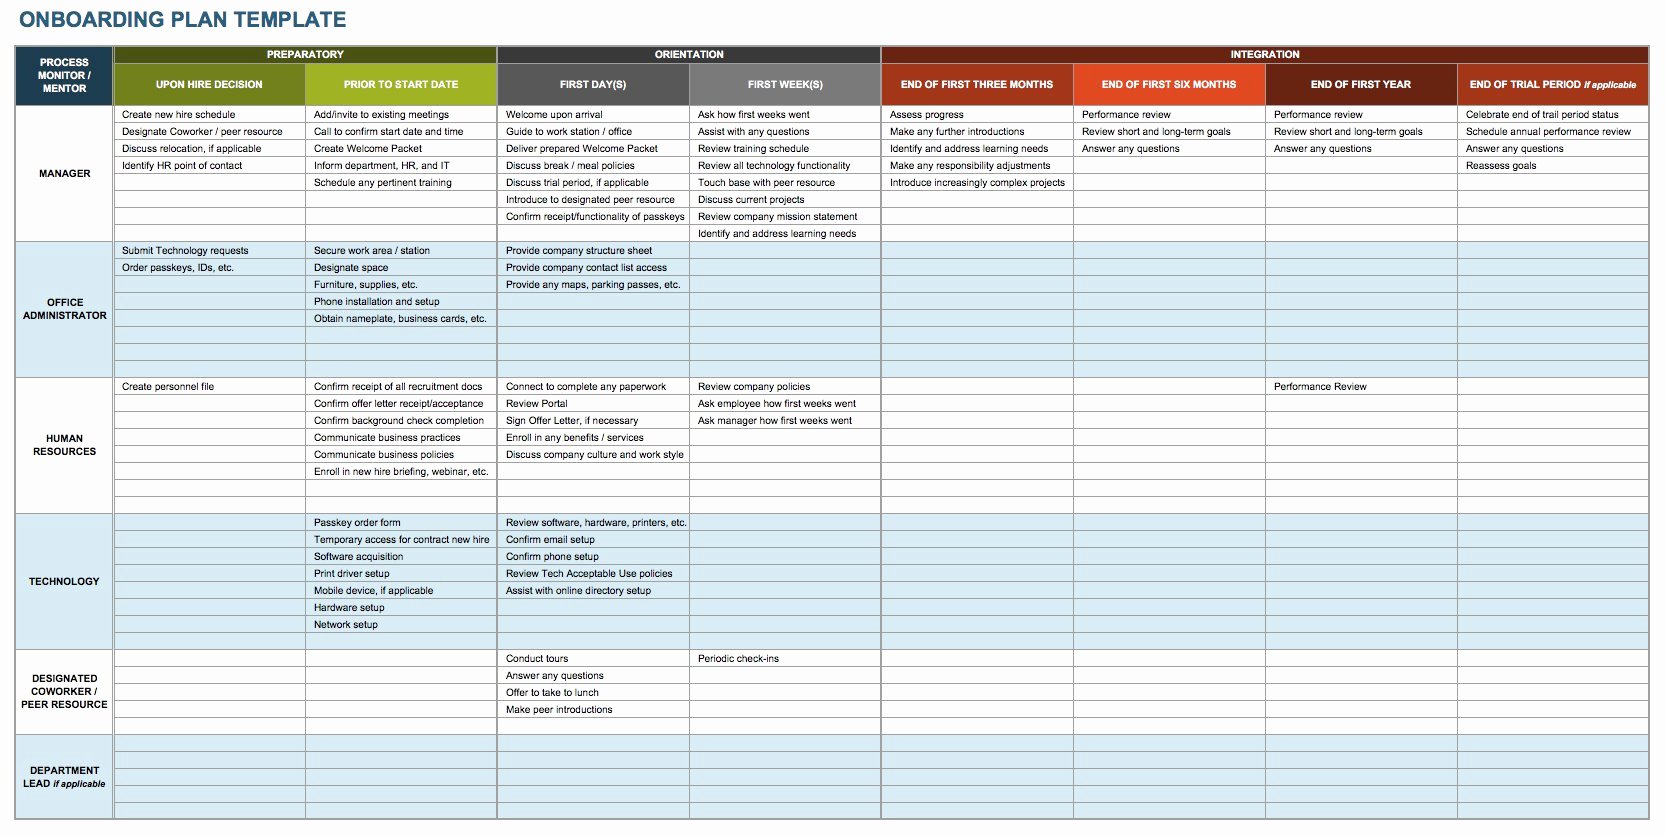 90 Day Onboarding Plan Template Inspirational Free Boarding Checklists and Templates